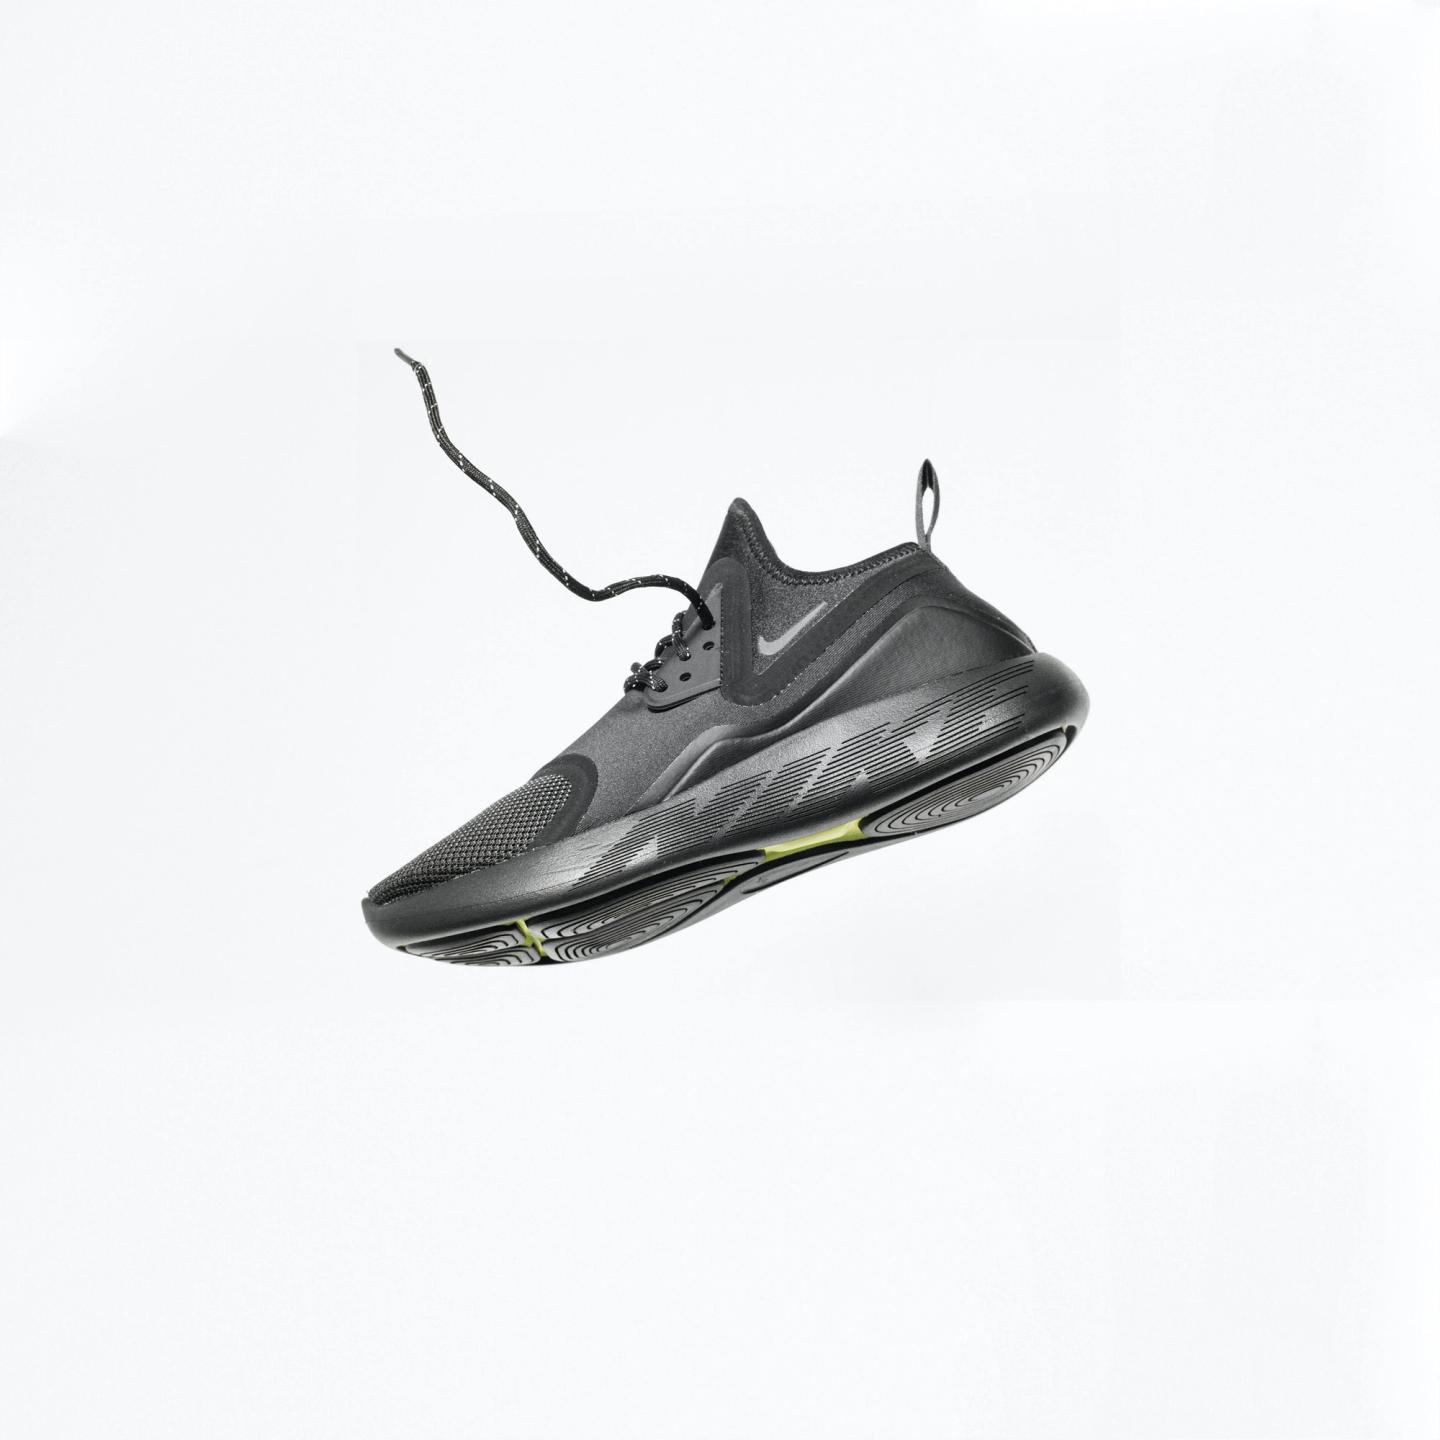 a black nike shoe is floating in the air on a white background .​​​​‌﻿‍﻿​‍​‍‌‍﻿﻿‌﻿​‍‌‍‍‌‌‍‌﻿‌‍‍‌‌‍﻿‍​‍​‍​﻿‍‍​‍​‍‌﻿​﻿‌‍​‌‌‍﻿‍‌‍‍‌‌﻿‌​‌﻿‍‌​‍﻿‍‌‍‍‌‌‍﻿﻿​‍​‍​‍﻿​​‍​‍‌‍‍​‌﻿​‍‌‍‌‌‌‍‌‍​‍​‍​﻿‍‍​‍​‍‌‍‍​‌﻿‌​‌﻿‌​‌﻿​​‌﻿​﻿​﻿‍‍​‍﻿﻿​‍﻿﻿‌﻿‌‍‌‍‍‌‌﻿​﻿‌﻿‌‌‌‍​‌‌‍﻿​​‍﻿‌‌‍‌‌‌‍‌​‌‍‍‌‌﻿‌​‌‍‍‌‌‍﻿‍‌‍‌﻿​‍﻿‌‌﻿​﻿‌﻿‌​‌﻿‌‌‌‍‌​‌‍‍‌‌‍﻿﻿​‍﻿‍‌﻿​﻿‌‍​‌‌‍﻿‍‌‍‍‌‌﻿‌​‌﻿‍‌​‍﻿‍‌‍​‍‌﻿‌‌‌‍‍‌‌‍﻿​‌‍‌​​‍﻿﻿‌﻿​‍‌‍‌‌‌‍﻿‌‌‍‍‌‌﻿‍​​‍﻿﻿‌‍‍‌‌‍﻿‍‌﻿‌​‌‍‌‌‌‍﻿‍‌﻿‌​​‍﻿﻿‌‍‌‌‌‍‌​‌‍‍‌‌﻿‌​​‍﻿﻿‌‍﻿‌‌‍﻿﻿‌‍‌​‌‍‌‌​﻿﻿‌‌﻿​​‌﻿​‍‌‍‌‌‌﻿​﻿‌‍‌‌‌‍﻿‍‌﻿‌​‌‍​‌‌﻿‌​‌‍‍‌‌‍﻿﻿‌‍﻿‍​﻿‍﻿‌‍‍‌‌‍‌​​﻿﻿‌​﻿​‌‌‍​‍​﻿‌​‌‍​‌​﻿​﻿​﻿‍​‌‍‌‌​﻿‍​​‍﻿‌‌‍​﻿‌‍​‌‌‍​﻿​﻿‌​​‍﻿‌​﻿‌​​﻿​‍‌‍​﻿​﻿​‌​‍﻿‌‌‍​‍‌‍​‌​﻿‌​​﻿​‍​‍﻿‌‌‍​‌‌‍​﻿​﻿‌‌​﻿‌‍‌‍​‌‌‍‌‍​﻿‍‌​﻿​​​﻿‍‌​﻿‌‌‌‍‌​​﻿​​​﻿‍﻿‌﻿‌​‌﻿‍‌‌﻿​​‌‍‌‌​﻿﻿‌‌﻿​﻿‌‍‍​‌‍﻿﻿‌‍‌‌​﻿‍﻿‌﻿​​‌‍​‌‌﻿‌​‌‍‍​​﻿﻿‌‌‍﻿‌‌‍‌‌‌‍‌​‌‍‍‌‌‍​‌​‍‌‌​﻿‌‌‌​​‍‌‌﻿﻿‌‍‍﻿‌‍‌‌‌﻿‍‌​‍‌‌​﻿​﻿‌​‌​​‍‌‌​﻿​﻿‌​‌​​‍‌‌​﻿​‍​﻿​‍‌‍‌‌​﻿‌﻿​﻿​​‌‍‌‌​﻿​﻿​﻿‌‍​﻿‌‌‌‍​﻿​﻿‍​‌‍‌‍‌‍​‌​﻿​‍​‍‌‌​﻿​‍​﻿​‍​‍‌‌​﻿‌‌‌​‌​​‍﻿‍‌‍​‌‌‍﻿​‌﻿‌​​﻿‍﻿‌﻿‌​‌‍﻿﻿‌‍﻿﻿‌‍﻿​​﻿﻿‌‌﻿​​‌﻿​‍‌‍‌‌‌﻿​﻿‌‍‌‌‌‍﻿‍‌﻿‌​‌‍​‌‌﻿‌​‌‍‍‌‌‍﻿﻿‌‍﻿‍​﻿﻿﻿‌‍​‍‌‍​‌‌﻿​﻿‌‍‌‌‌‌‌‌‌﻿​‍‌‍﻿​​﻿﻿‌‌‍‍​‌﻿‌​‌﻿‌​‌﻿​​‌﻿​﻿​‍‌‌​﻿​﻿‌​​‌​‍‌‌​﻿​‍‌​‌‍​‍‌‌​﻿​‍‌​‌‍‌﻿‌‍‌‍‍‌‌﻿​﻿‌﻿‌‌‌‍​‌‌‍﻿​​‍﻿‌‌‍‌‌‌‍‌​‌‍‍‌‌﻿‌​‌‍‍‌‌‍﻿‍‌‍‌﻿​‍﻿‌‌﻿​﻿‌﻿‌​‌﻿‌‌‌‍‌​‌‍‍‌‌‍﻿﻿​‍﻿‍‌﻿​﻿‌‍​‌‌‍﻿‍‌‍‍‌‌﻿‌​‌﻿‍‌​‍﻿‍‌‍​‍‌﻿‌‌‌‍‍‌‌‍﻿​‌‍‌​​‍‌‍‌‍‍‌‌‍‌​​﻿﻿‌​﻿​‌‌‍​‍​﻿‌​‌‍​‌​﻿​﻿​﻿‍​‌‍‌‌​﻿‍​​‍﻿‌‌‍​﻿‌‍​‌‌‍​﻿​﻿‌​​‍﻿‌​﻿‌​​﻿​‍‌‍​﻿​﻿​‌​‍﻿‌‌‍​‍‌‍​‌​﻿‌​​﻿​‍​‍﻿‌‌‍​‌‌‍​﻿​﻿‌‌​﻿‌‍‌‍​‌‌‍‌‍​﻿‍‌​﻿​​​﻿‍‌​﻿‌‌‌‍‌​​﻿​​​‍‌‍‌﻿‌​‌﻿‍‌‌﻿​​‌‍‌‌​﻿﻿‌‌﻿​﻿‌‍‍​‌‍﻿﻿‌‍‌‌​‍‌‍‌﻿​​‌‍​‌‌﻿‌​‌‍‍​​﻿﻿‌‌‍﻿‌‌‍‌‌‌‍‌​‌‍‍‌‌‍​‌​‍‌‌​﻿‌‌‌​​‍‌‌﻿﻿‌‍‍﻿‌‍‌‌‌﻿‍‌​‍‌‌​﻿​﻿‌​‌​​‍‌‌​﻿​﻿‌​‌​​‍‌‌​﻿​‍​﻿​‍‌‍‌‌​﻿‌﻿​﻿​​‌‍‌‌​﻿​﻿​﻿‌‍​﻿‌‌‌‍​﻿​﻿‍​‌‍‌‍‌‍​‌​﻿​‍​‍‌‌​﻿​‍​﻿​‍​‍‌‌​﻿‌‌‌​‌​​‍﻿‍‌‍​‌‌‍﻿​‌﻿‌​​‍‌‍‌﻿‌﻿‌‍﻿﻿‌﻿​‍‌‍‍﻿‌﻿​﻿‌﻿​​‌‍​‌‌‍​﻿‌‍‌‌​﻿﻿‌‌﻿​‍‌‍‌‌‌‍﻿‌‌‍‍‌‌﻿‍​​‍‌‍‌﻿‌​‌‍﻿﻿‌‍﻿﻿‌‍﻿​​﻿﻿‌‌﻿​​‌﻿​‍‌‍‌‌‌﻿​﻿‌‍‌‌‌‍﻿‍‌﻿‌​‌‍​‌‌﻿‌​‌‍‍‌‌‍﻿﻿‌‍﻿‍​‍​‍‌﻿﻿‌